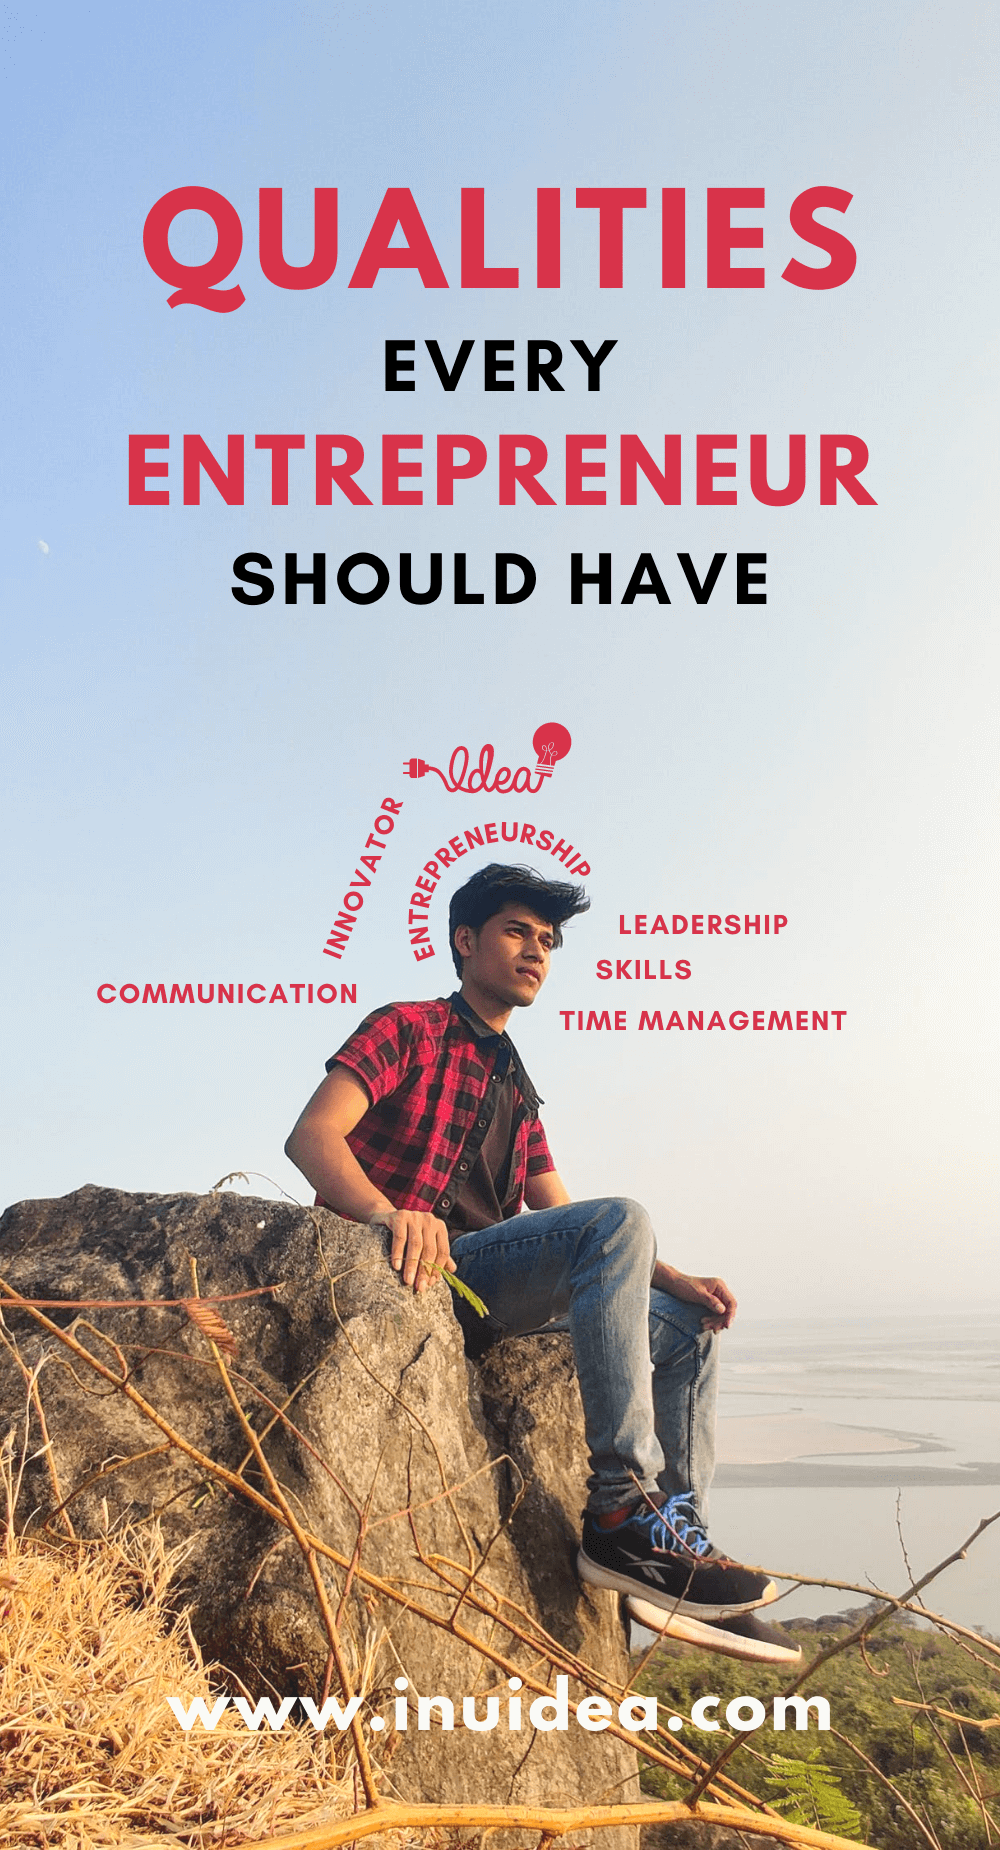 What are the Entrepreneurship qualities an Entrepreneur should have